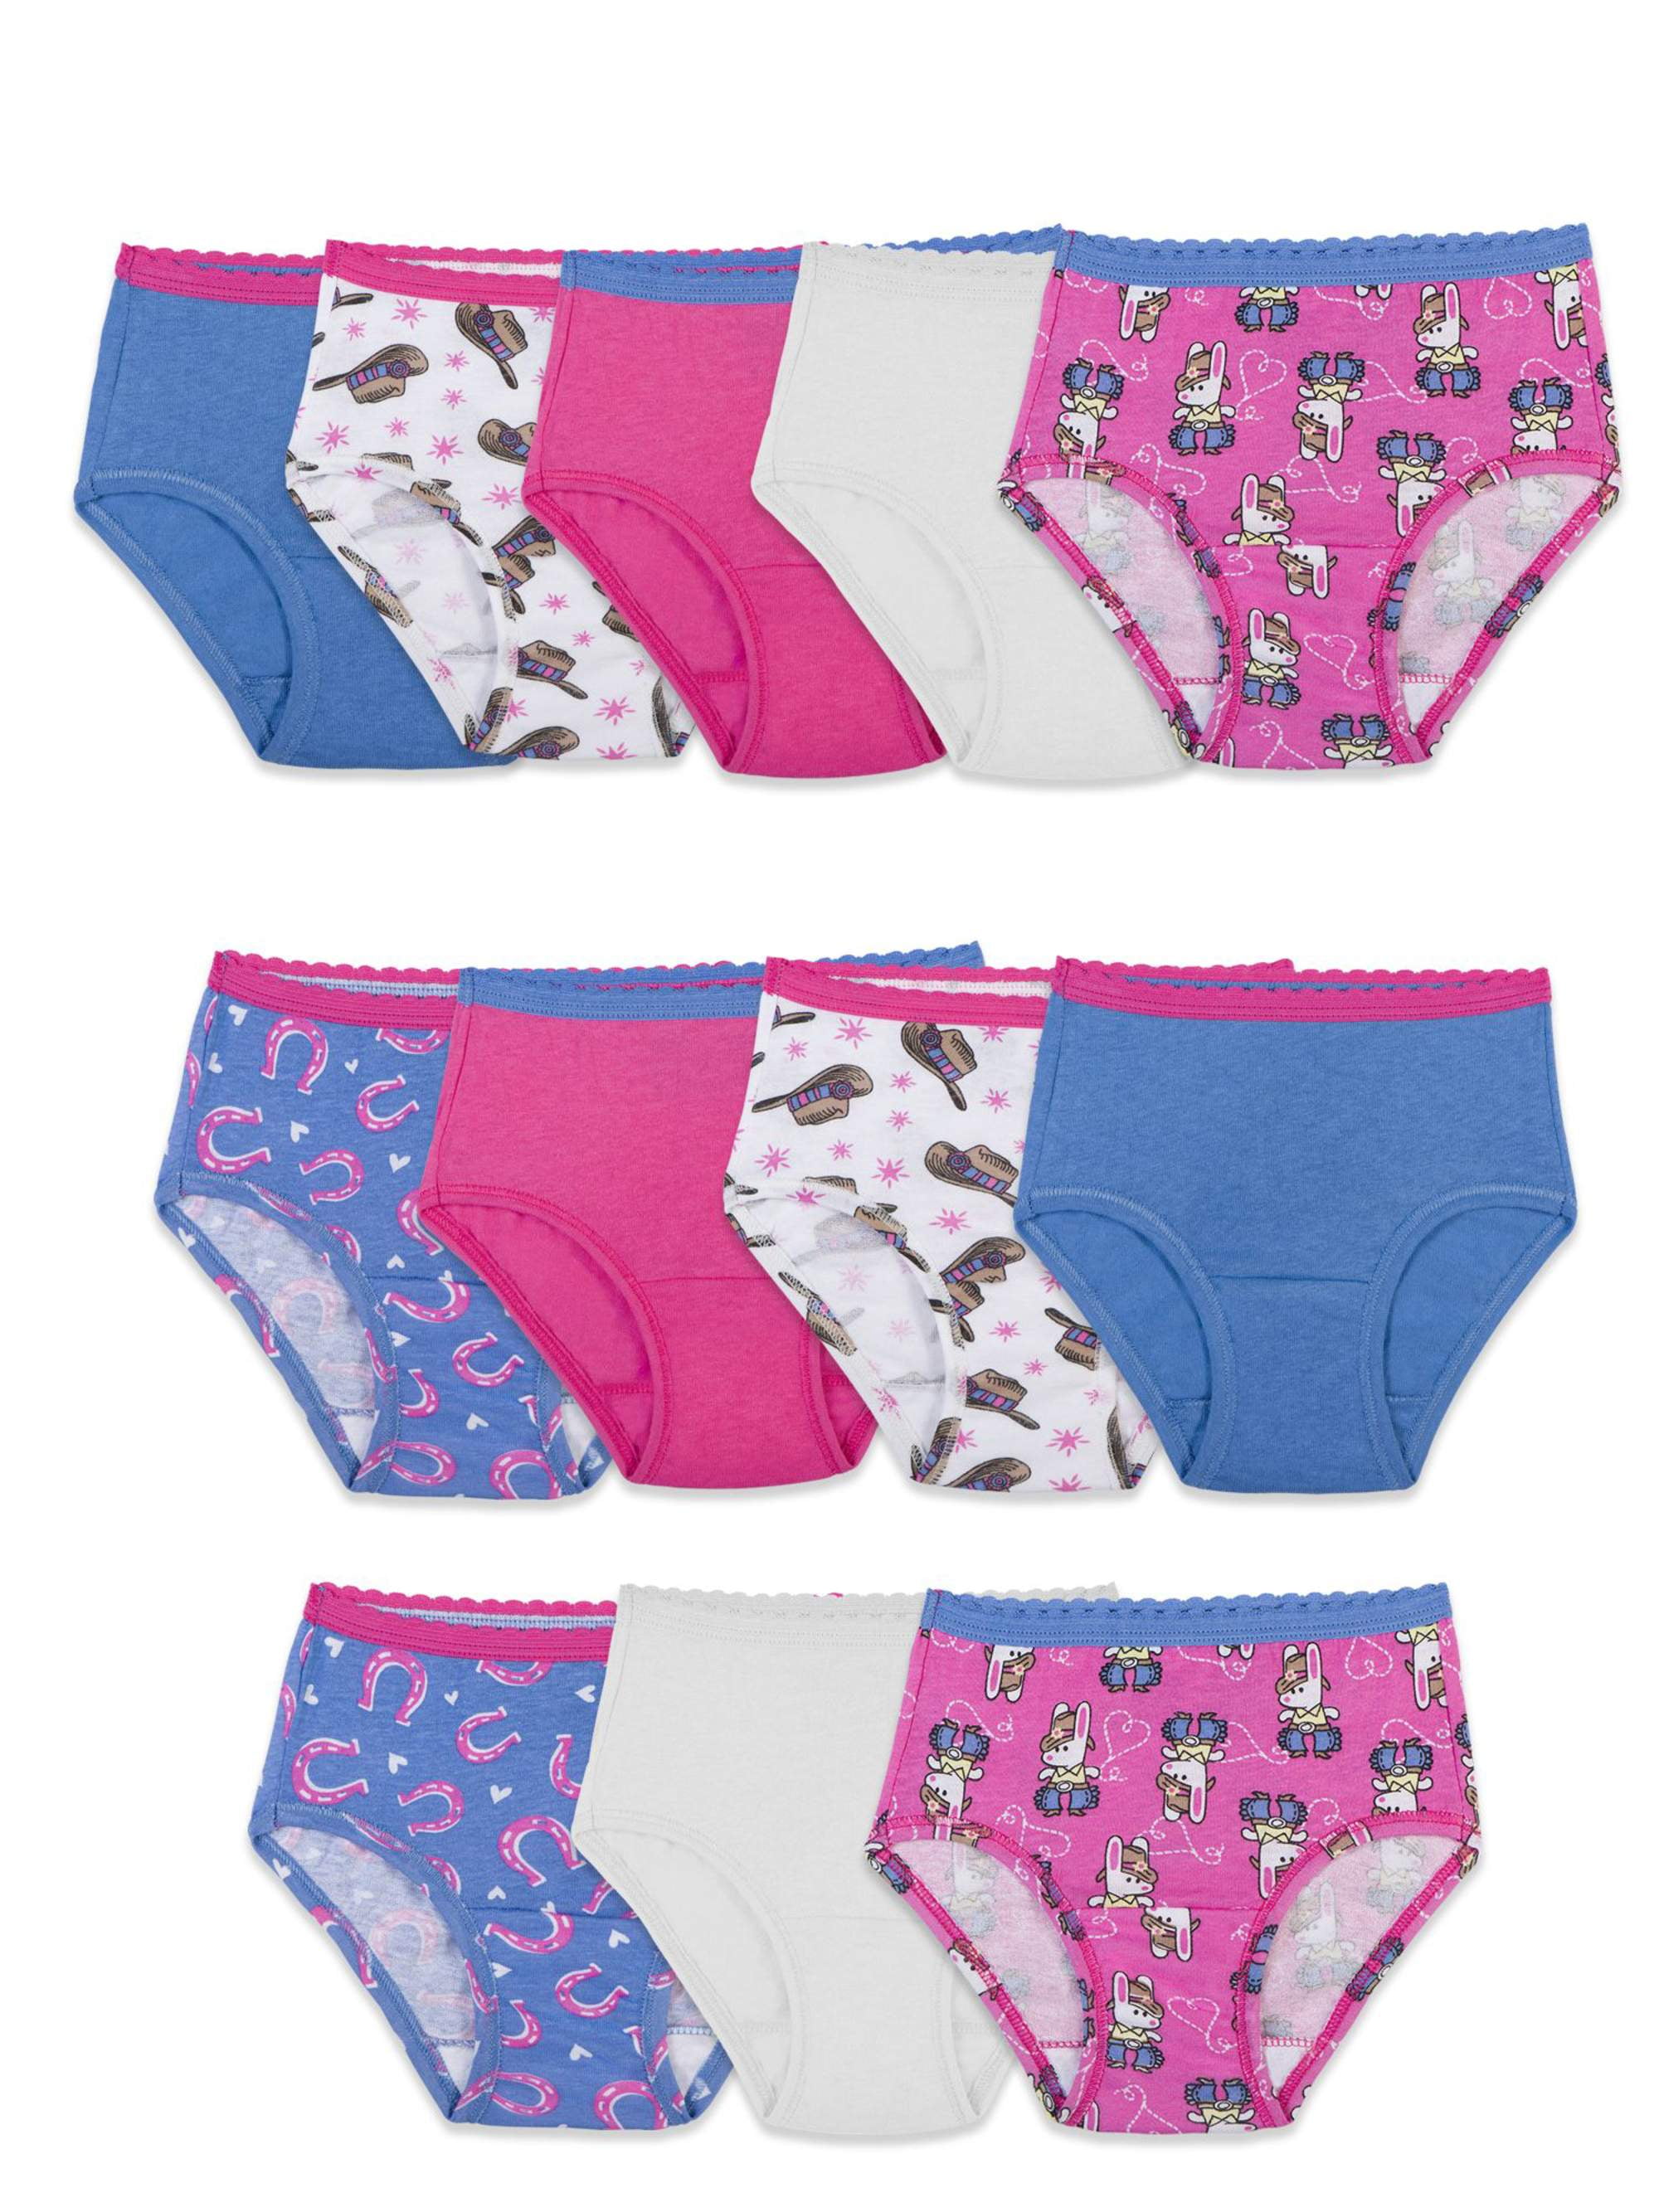 Fruit of the Loom Toddler Girl Brief Underwear, 12 Pack, Sizes 2T